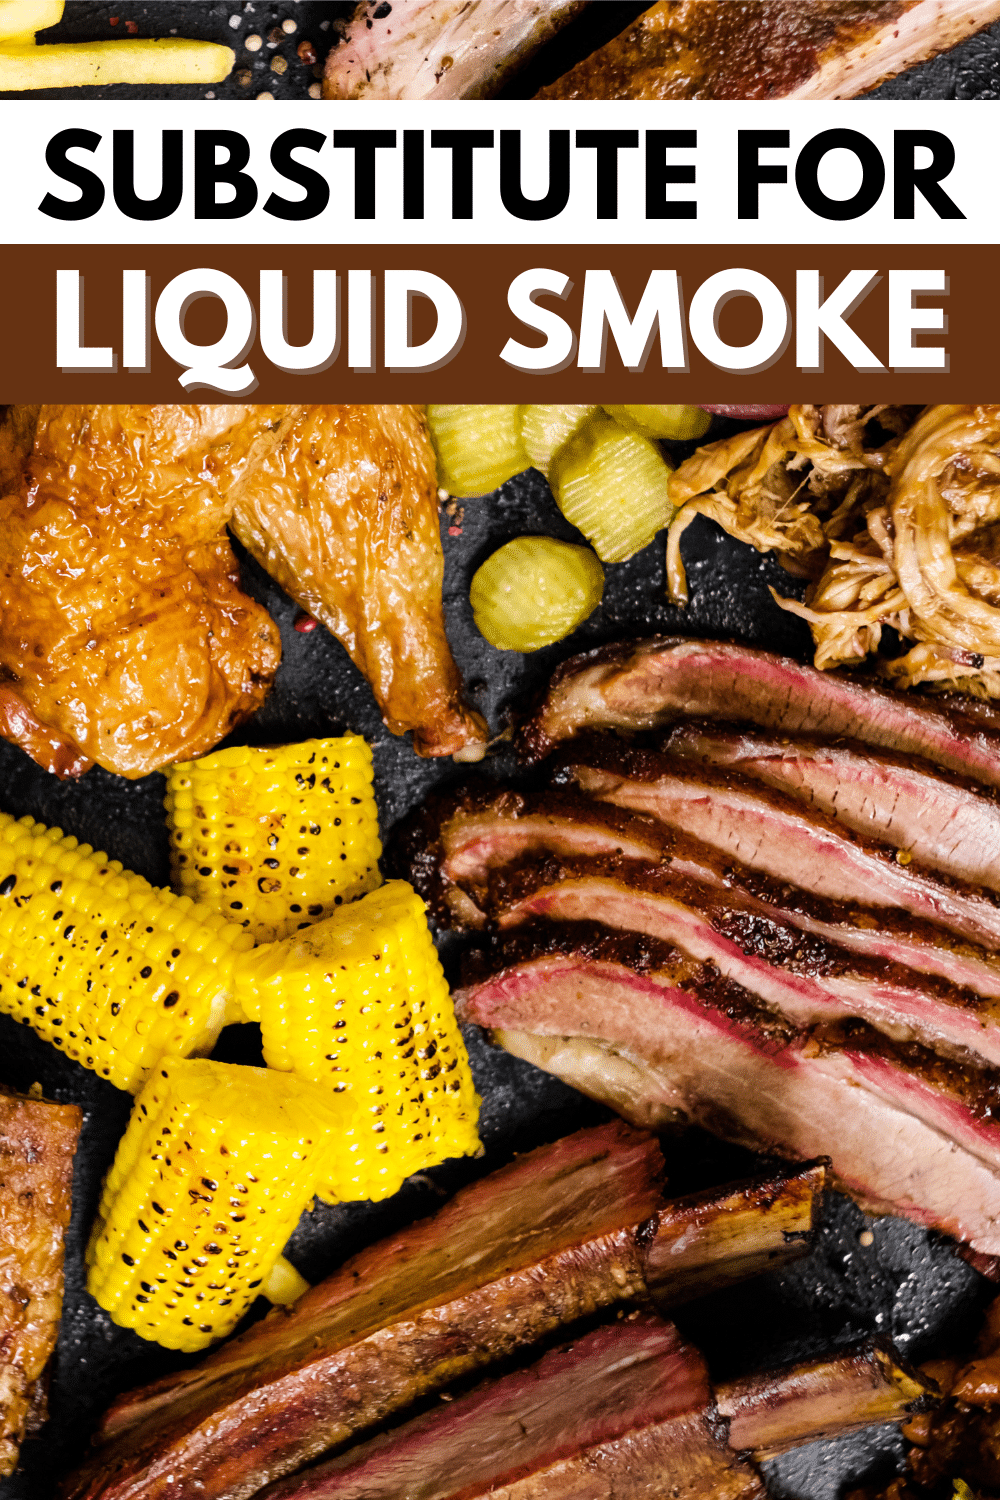 Discover the best substitutes for liquid smoke! You never have to miss out on that smoky flavor again with these top alternatives, #substituteforliquidsmoke #liquidsmoke #substitute #liquidsmokesubstitute #smokeflavor via @wondermomwannab